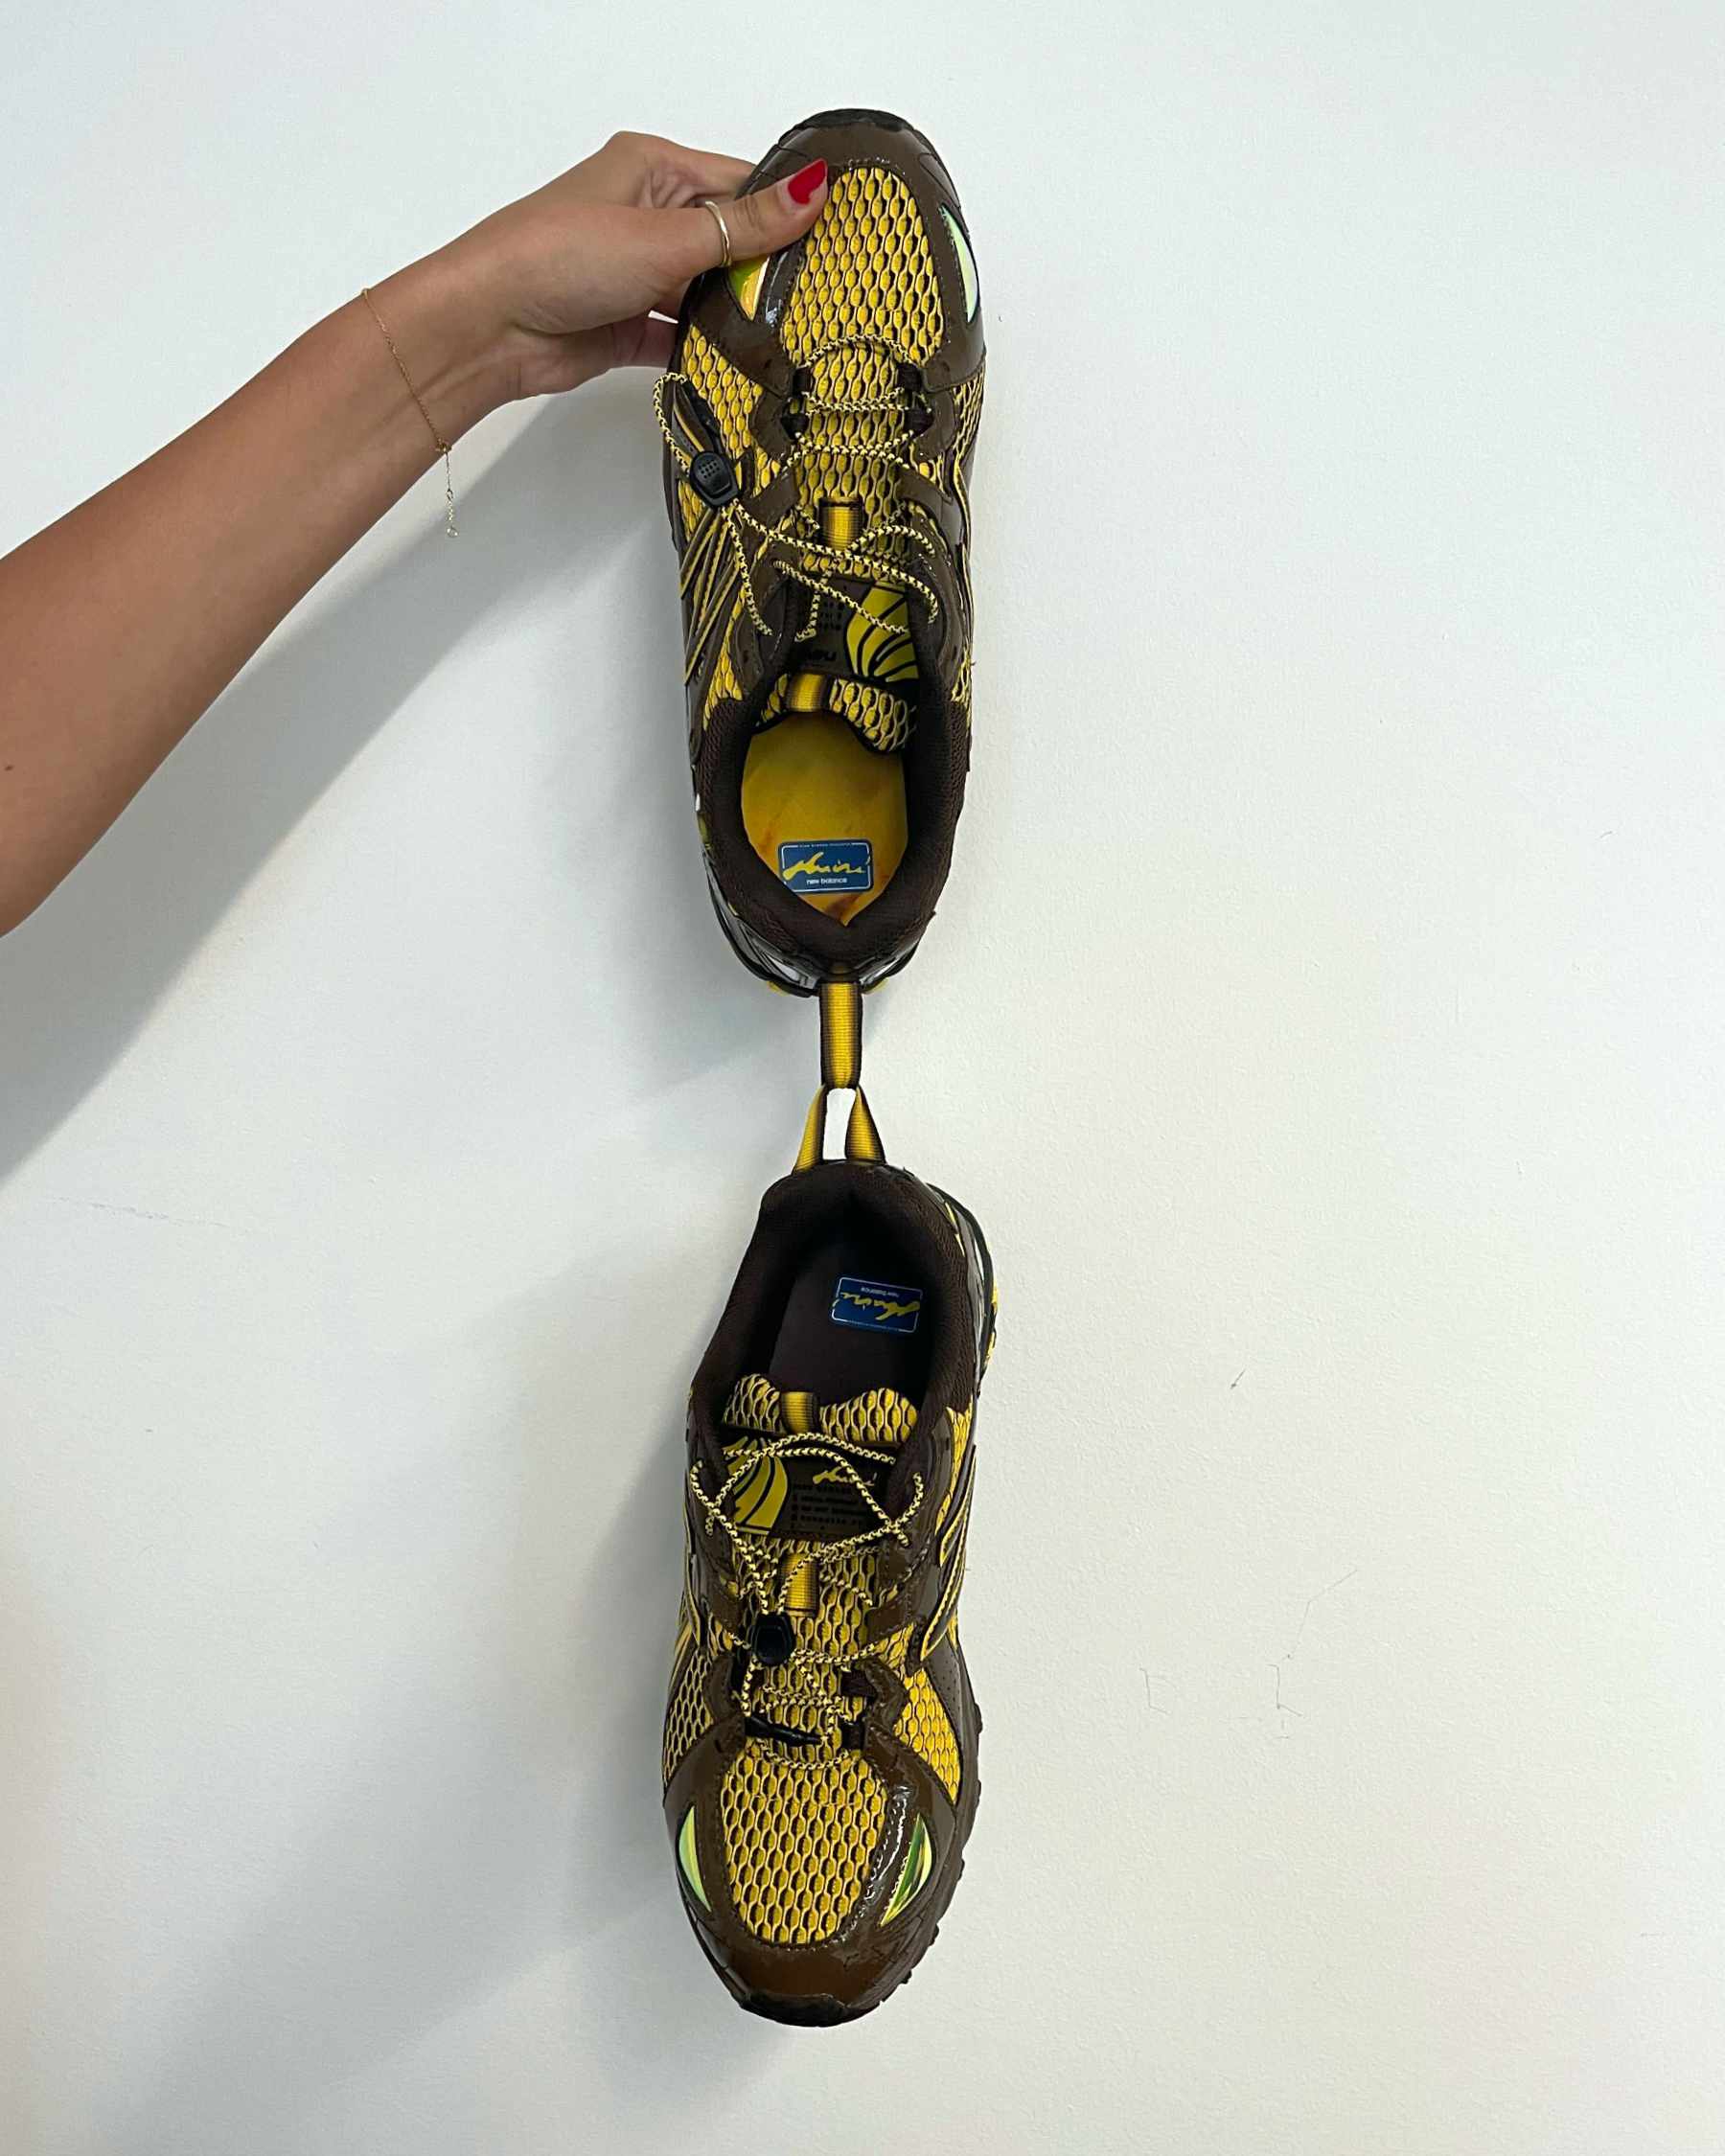 Amine's New Balance 610 shoe, "The Mooz," in brown and yellow colors hanging from the rear pull tab